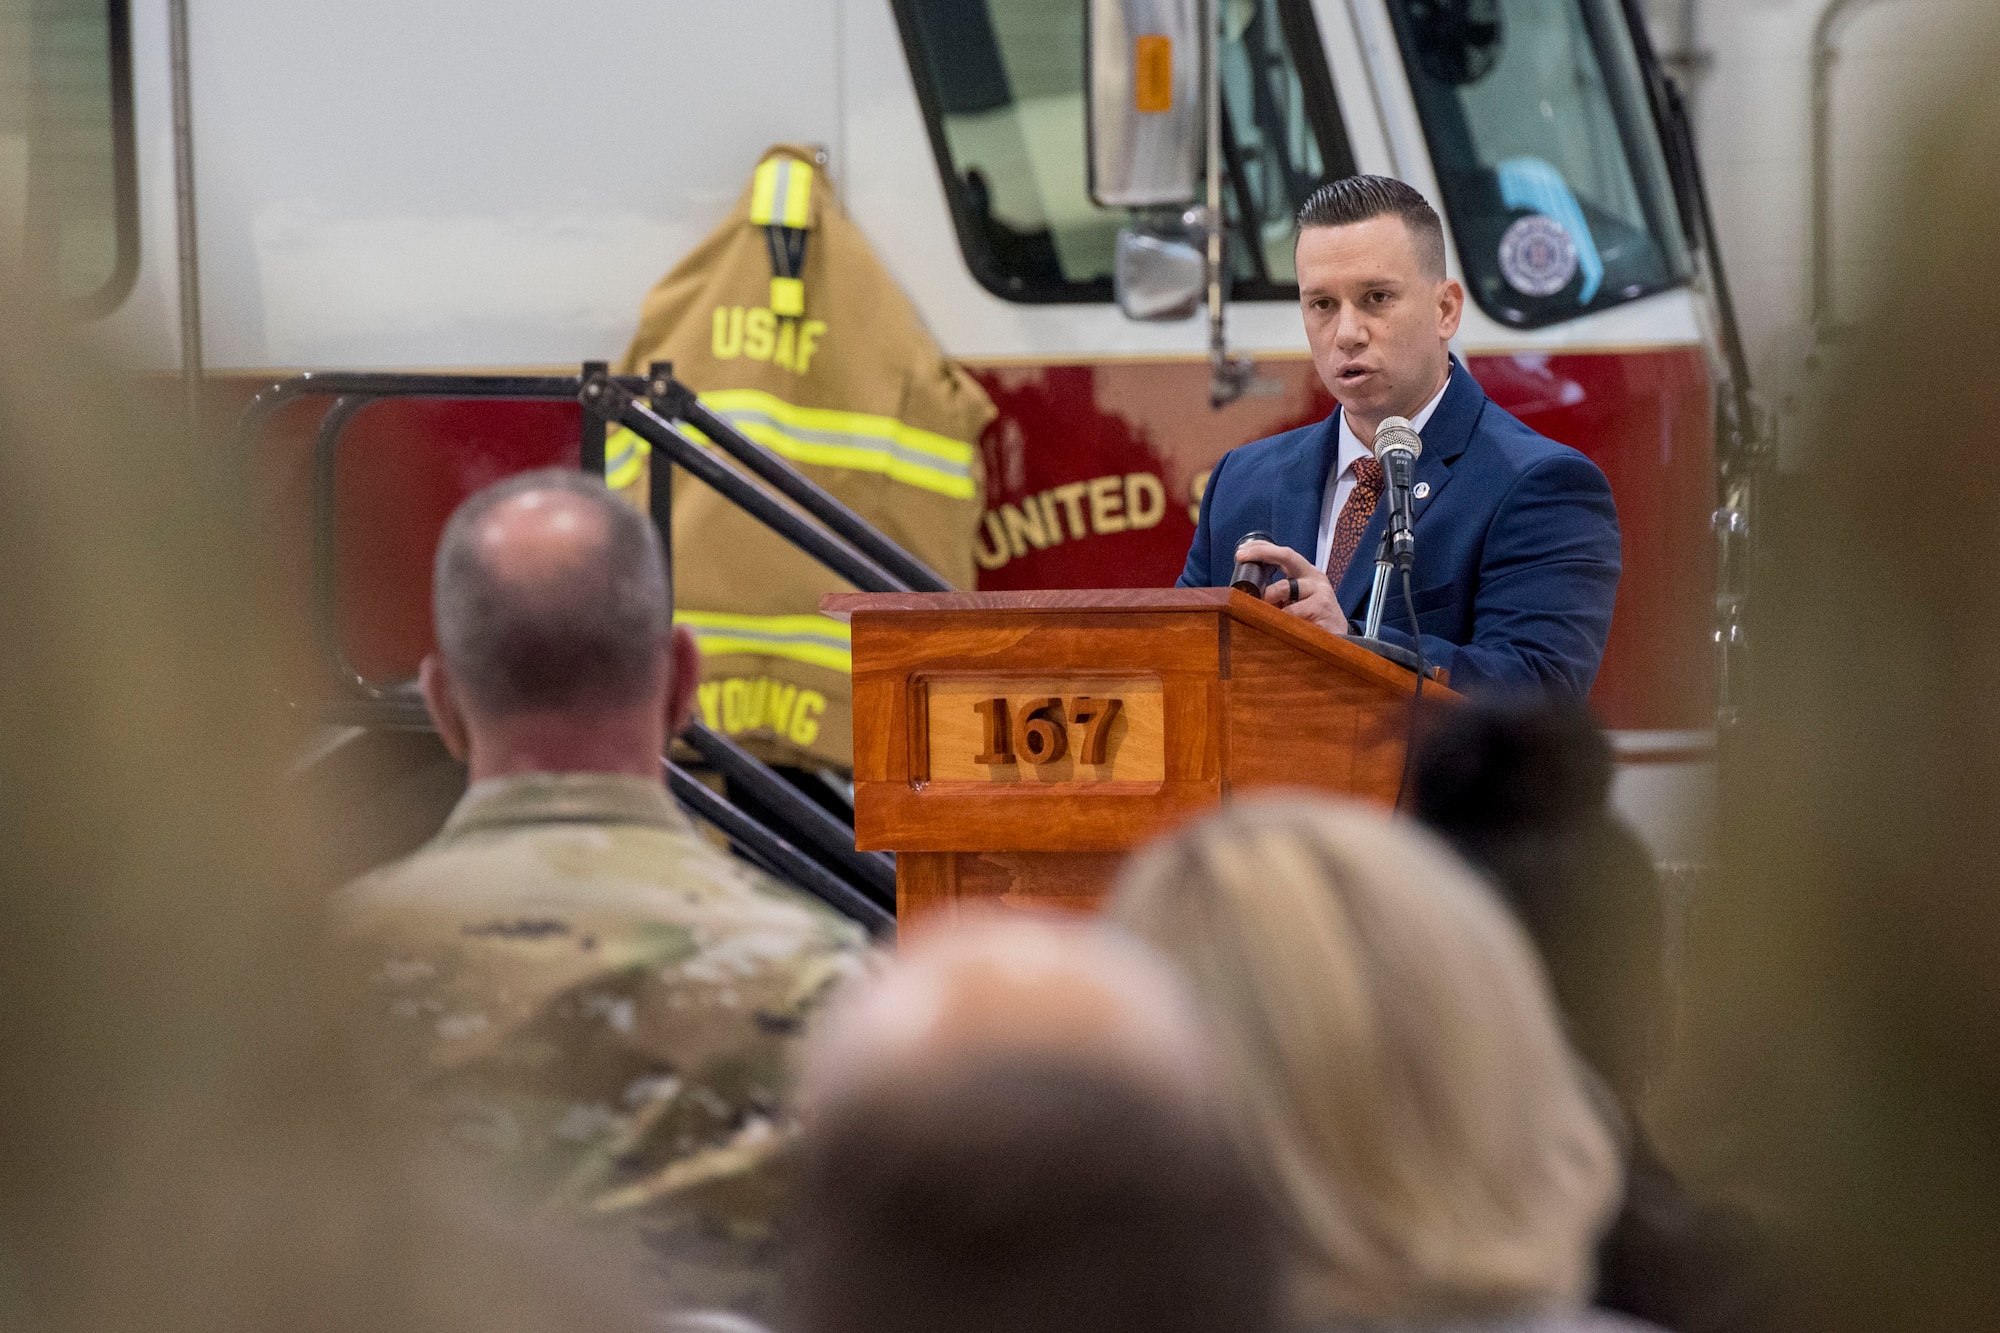 U.S. Air Force Tech. Sgt. Brandon Spears delivers a eulogy for Staff Sgt. Logan Young during a memorial service held at the 167th Airlift Wing, Shepherd Field, Martinsburg, West Virginia, March 6, 2021. Spears and Logan and become friends while serving together at two different active duty stations.